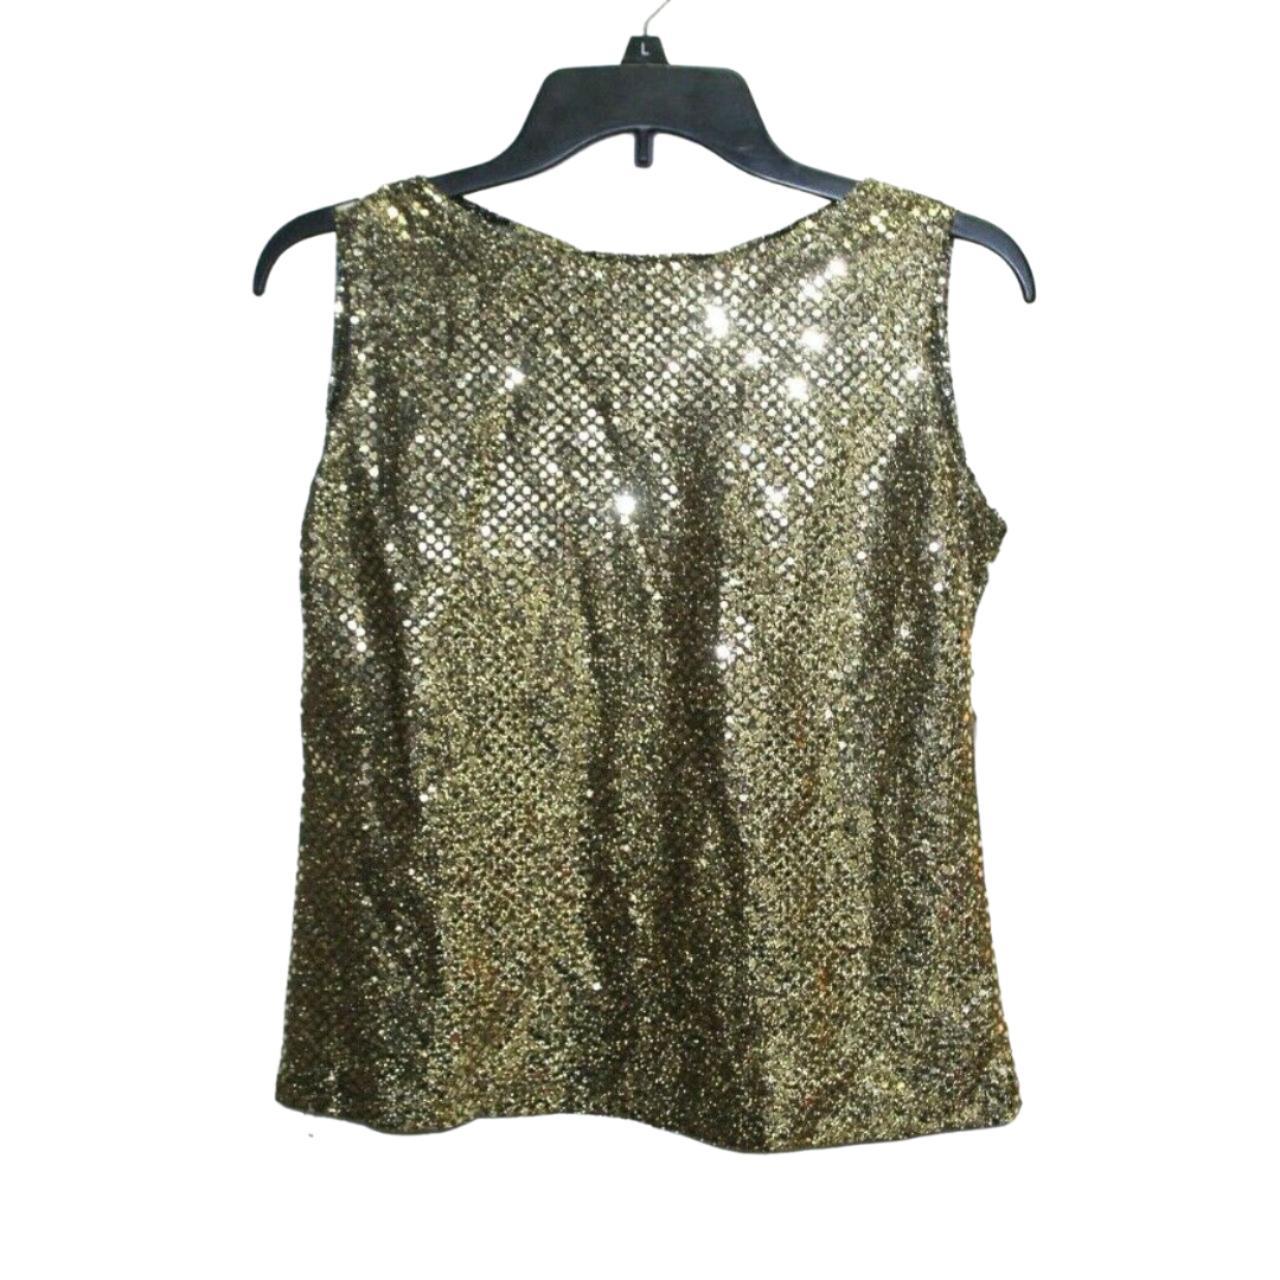 Product Image 1 - Notations womens top size S